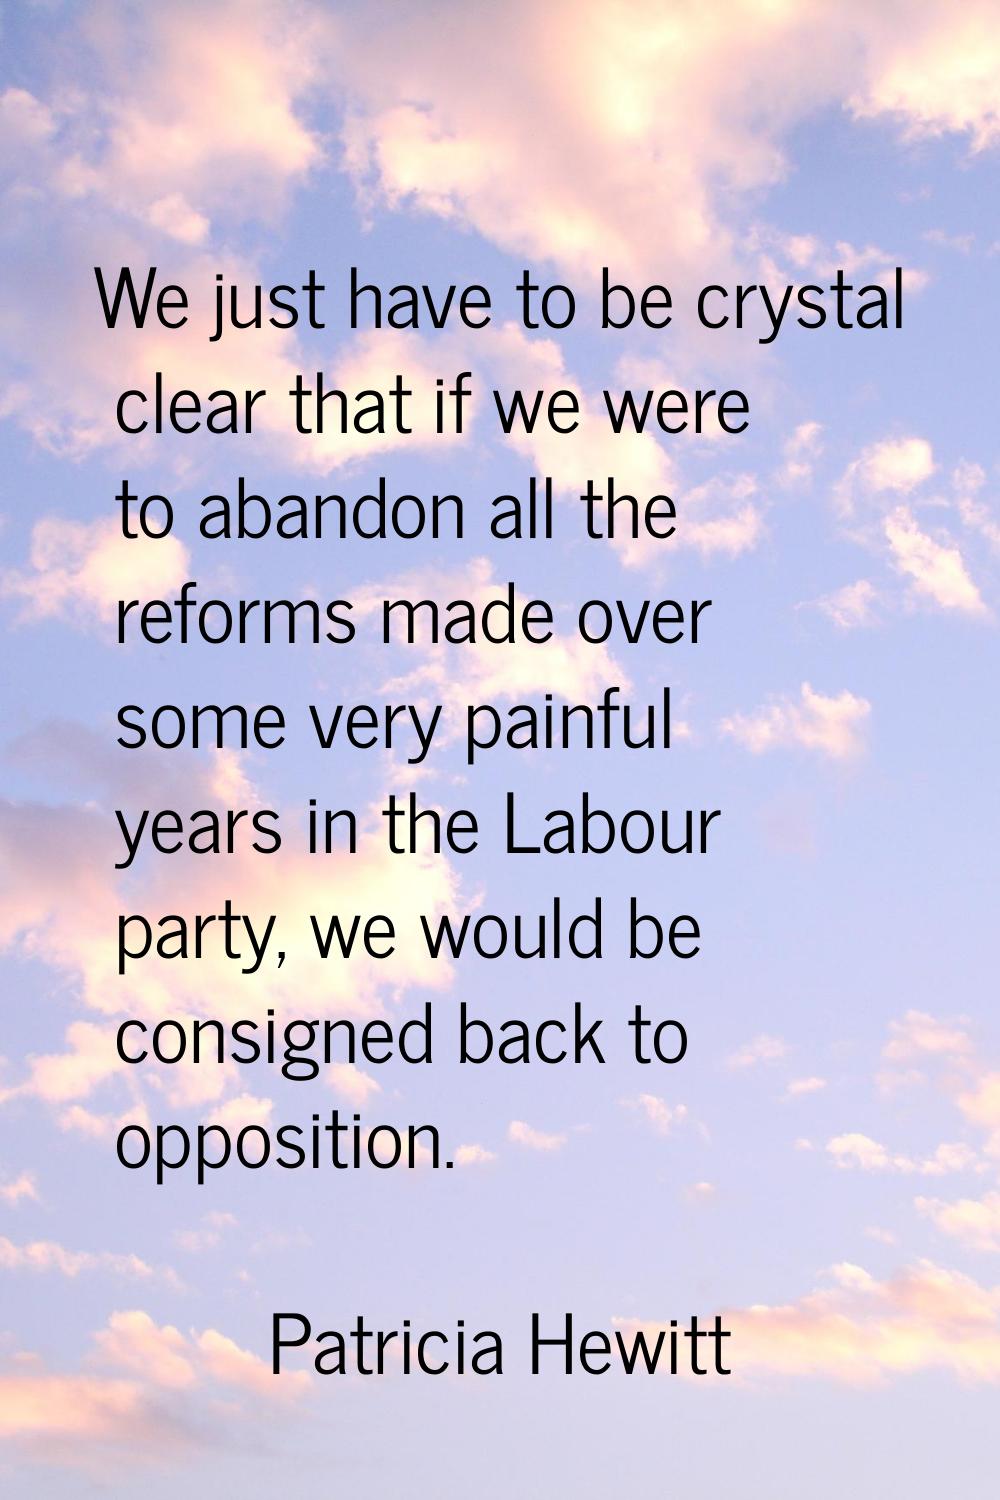 We just have to be crystal clear that if we were to abandon all the reforms made over some very pai